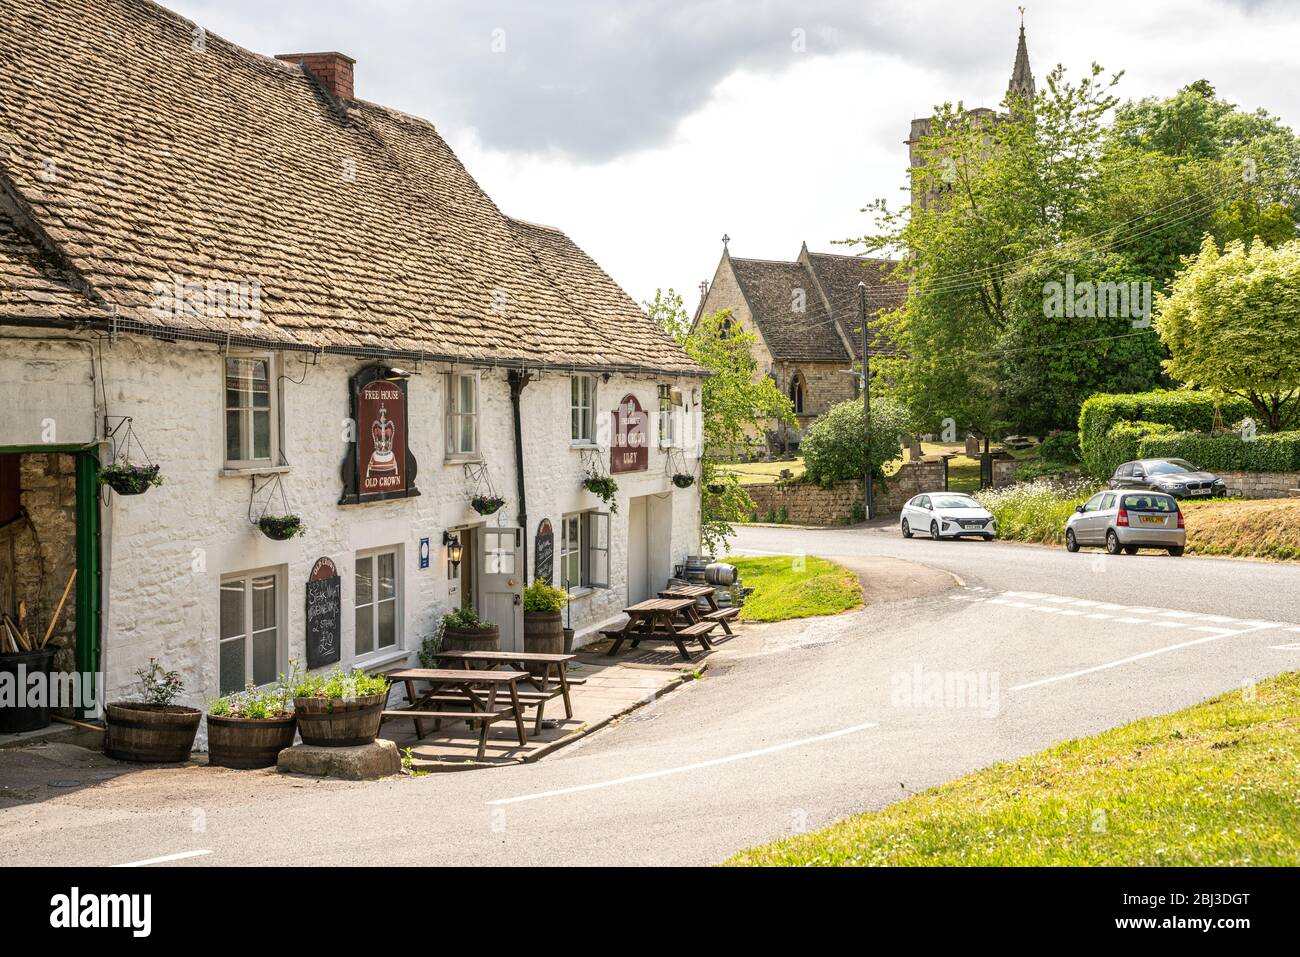 The Cotswold village of Uley with the Old Crown country pub and The Church of Saint Giles, United Kingdom Stock Photo